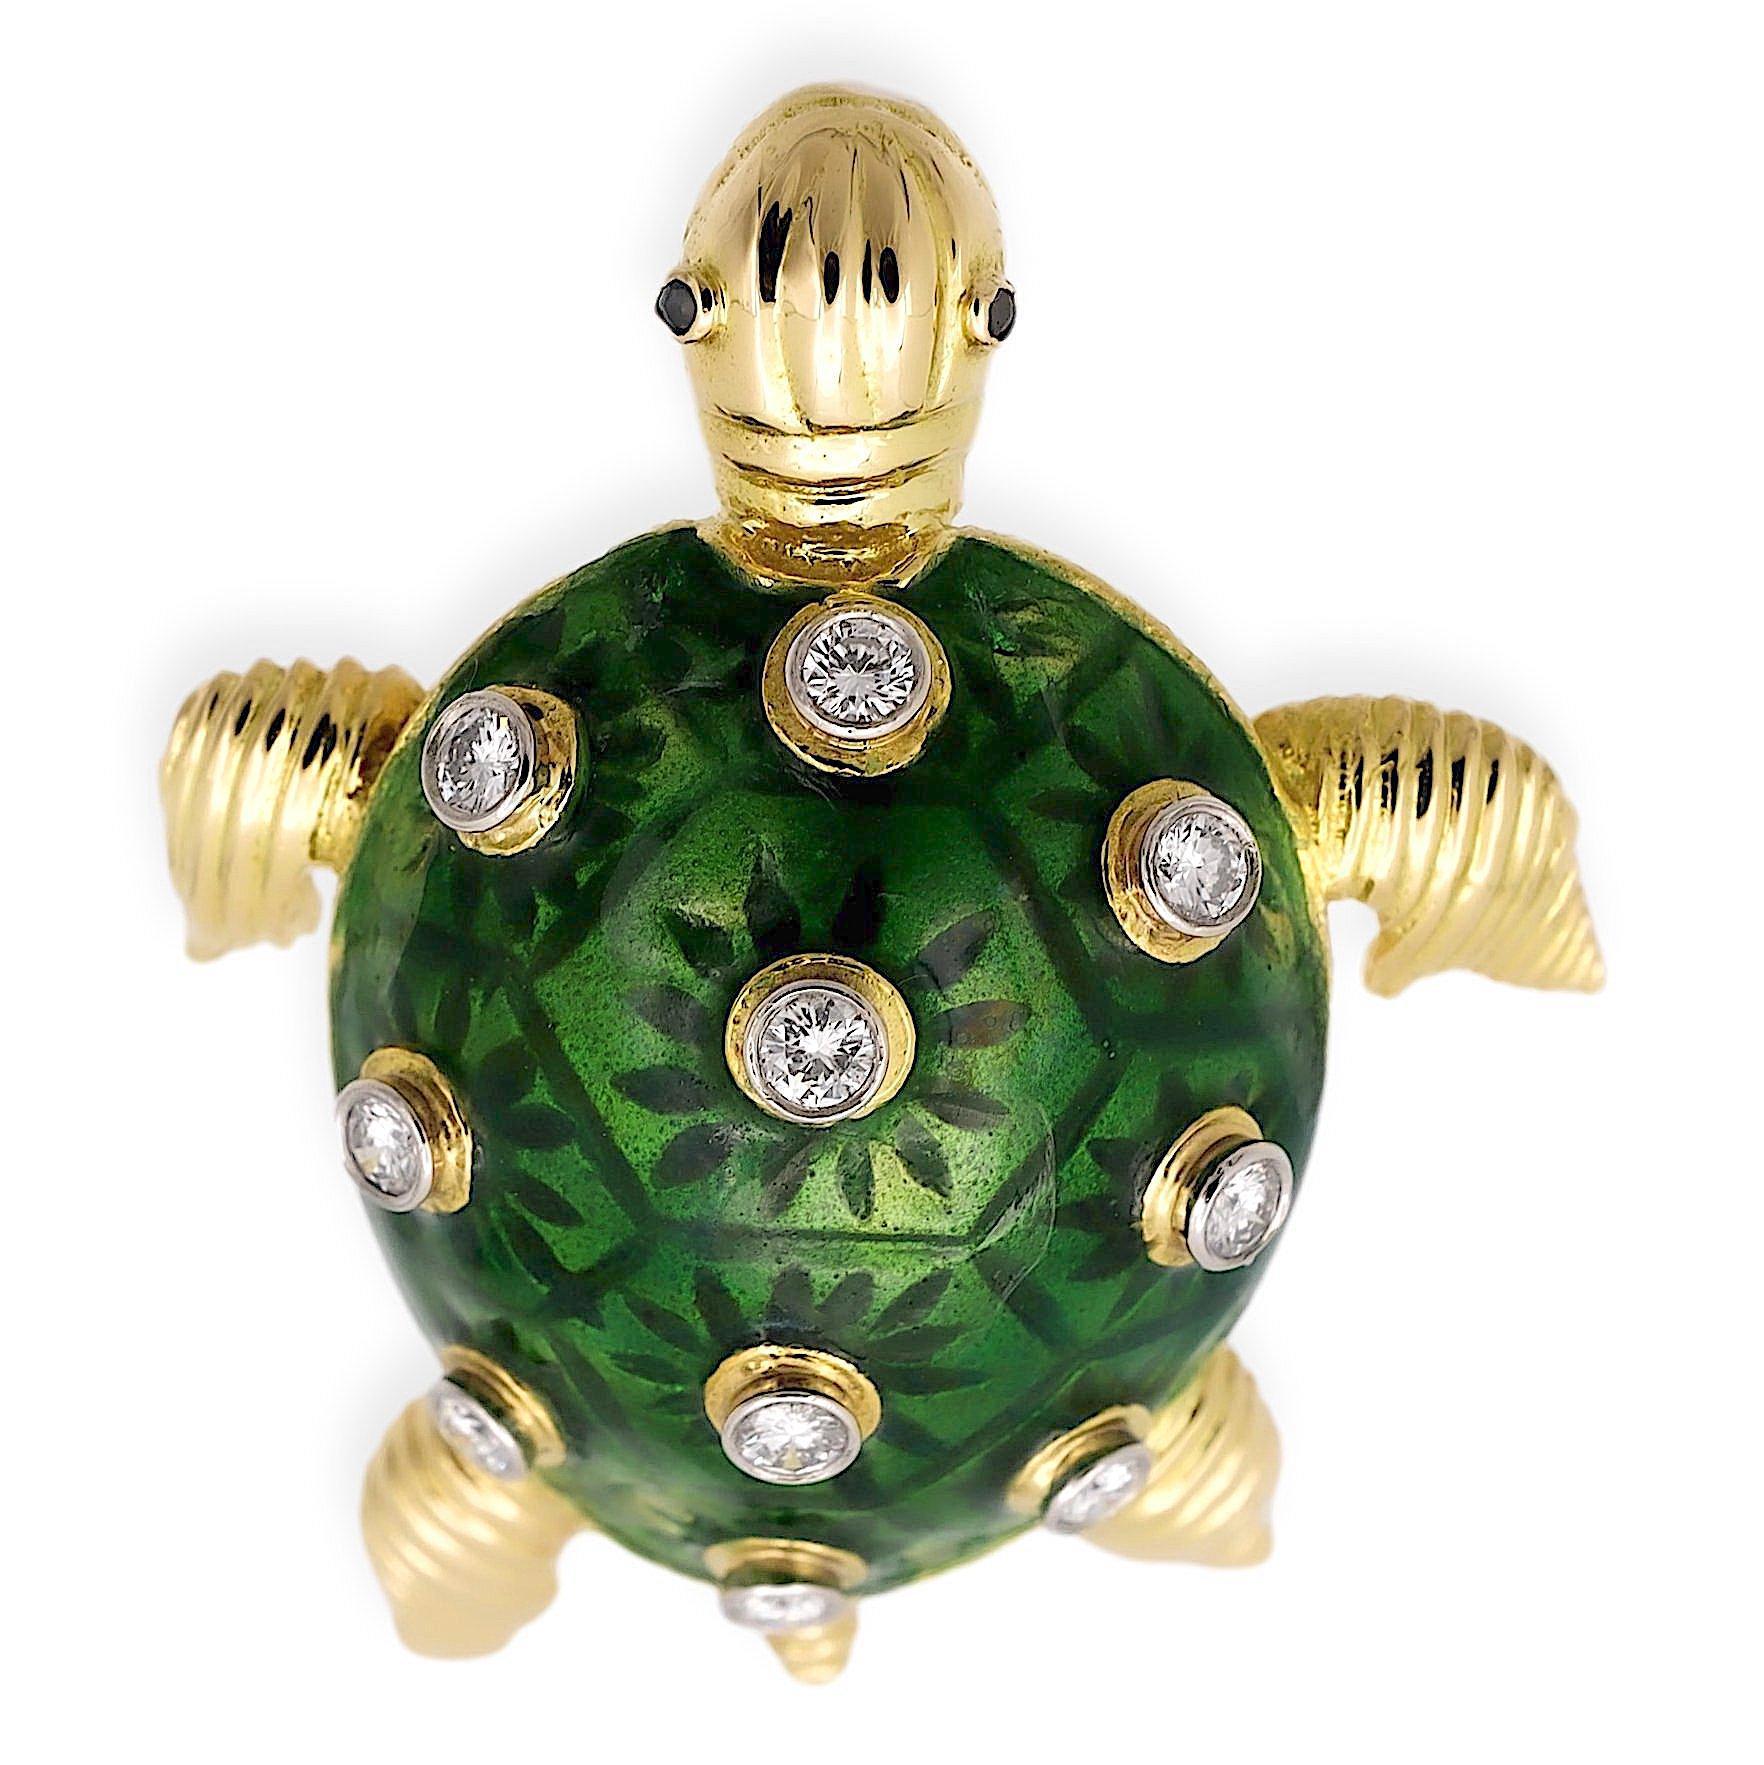 Vintage Turtle Brooch impeccably crafted in carved 18k yellow gold, adorned with vibrant green enamel, and embellished with ten round brilliant cut diamonds weighing a total of approximately 0.60 carats. Brooch has a tube pin with safety catch